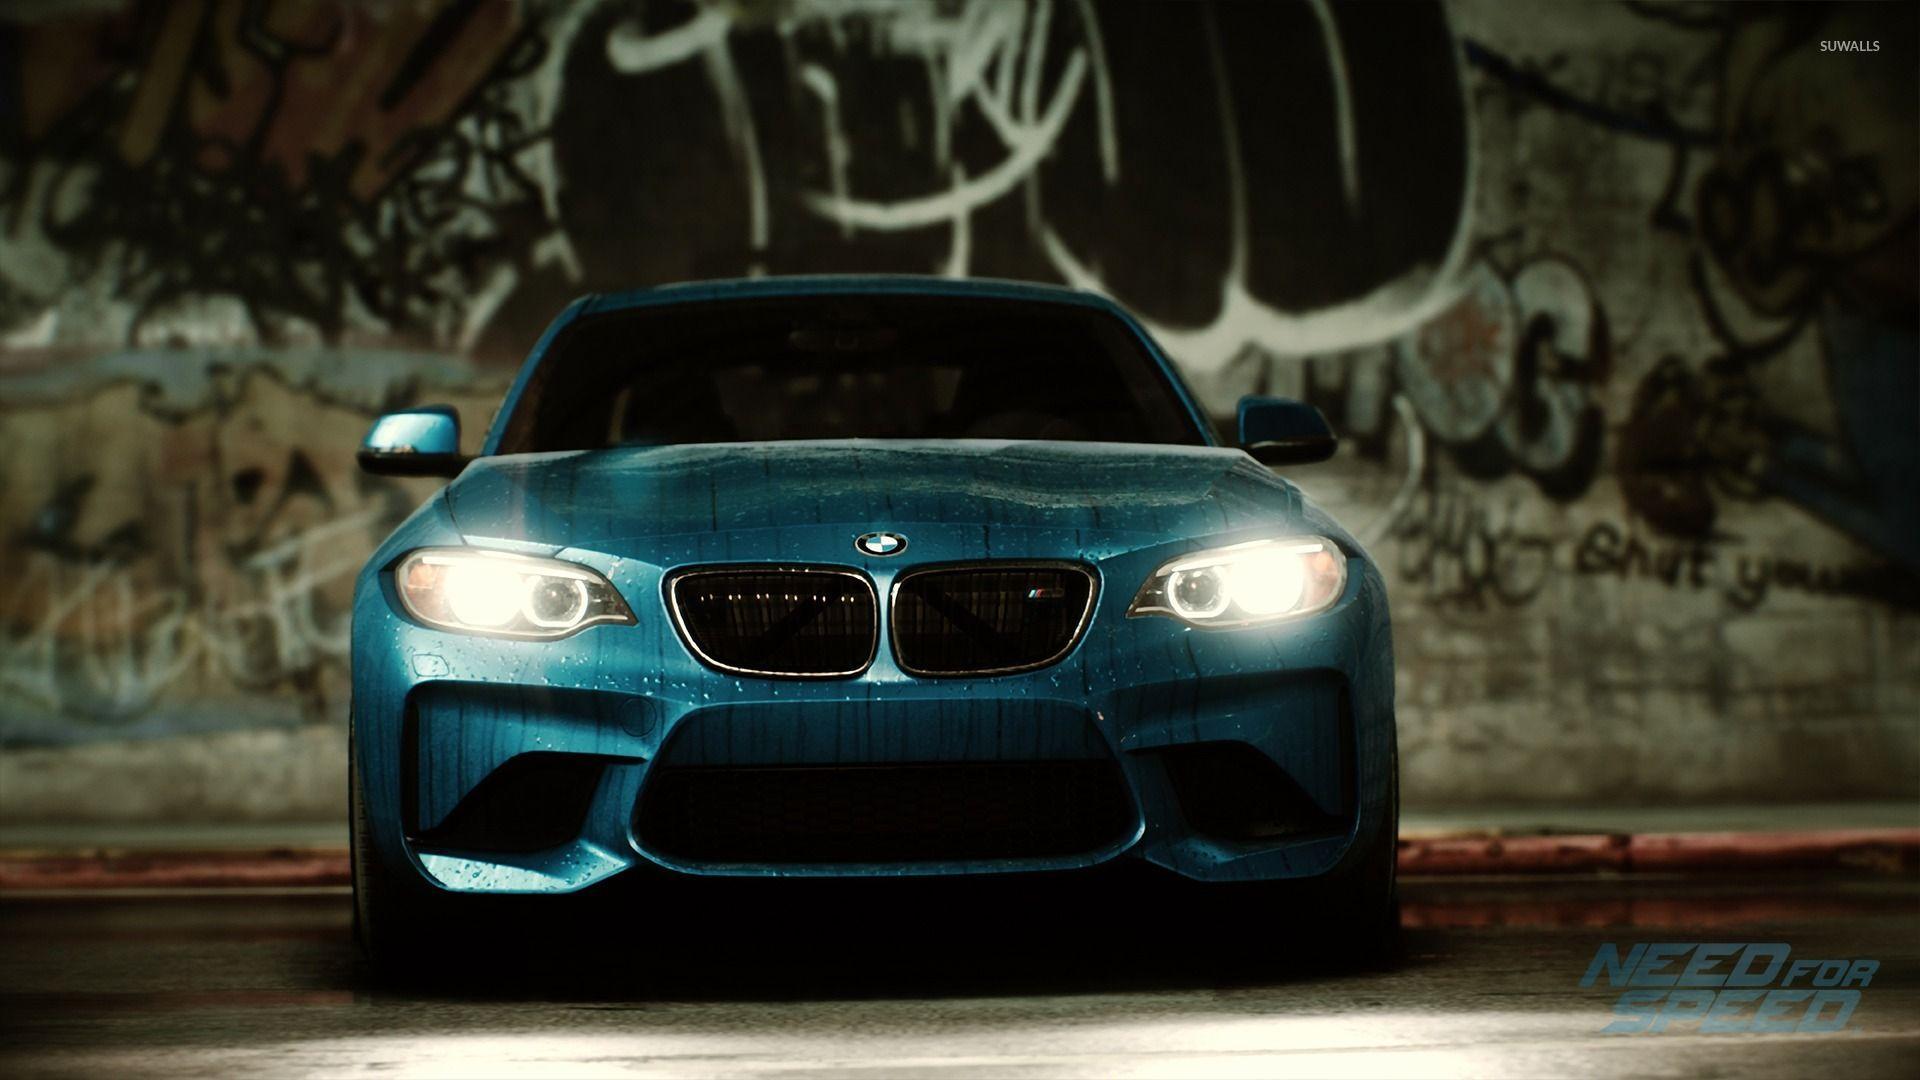 BMW M2 Coupe in Need for Speed wallpaper wallpaper